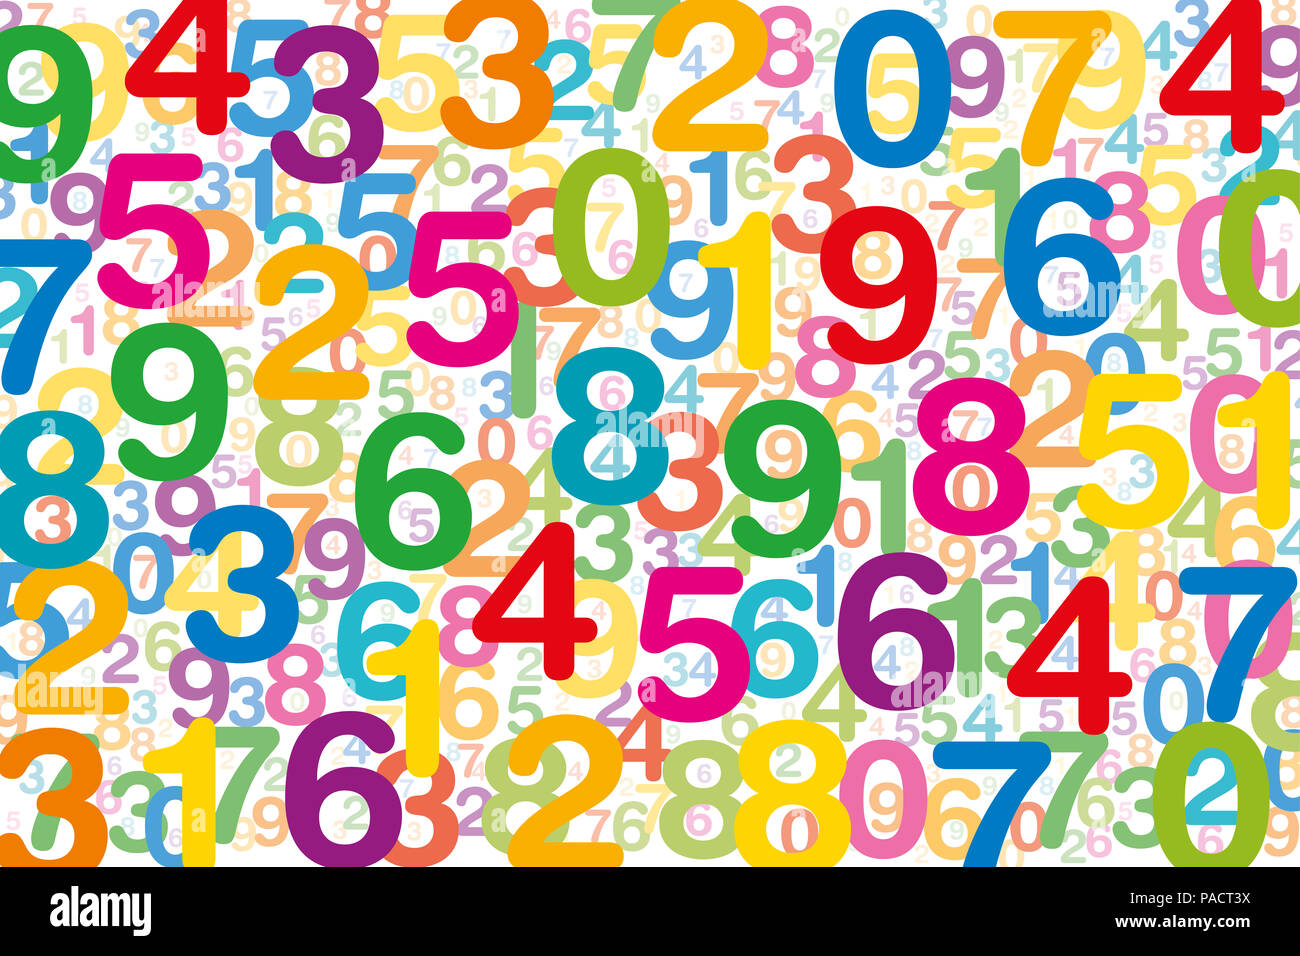 Colored numbers on white background. Randomly distributed overlapping numerals. Symbol for numerology or a flood of data. One to zero disorganized. Stock Photo